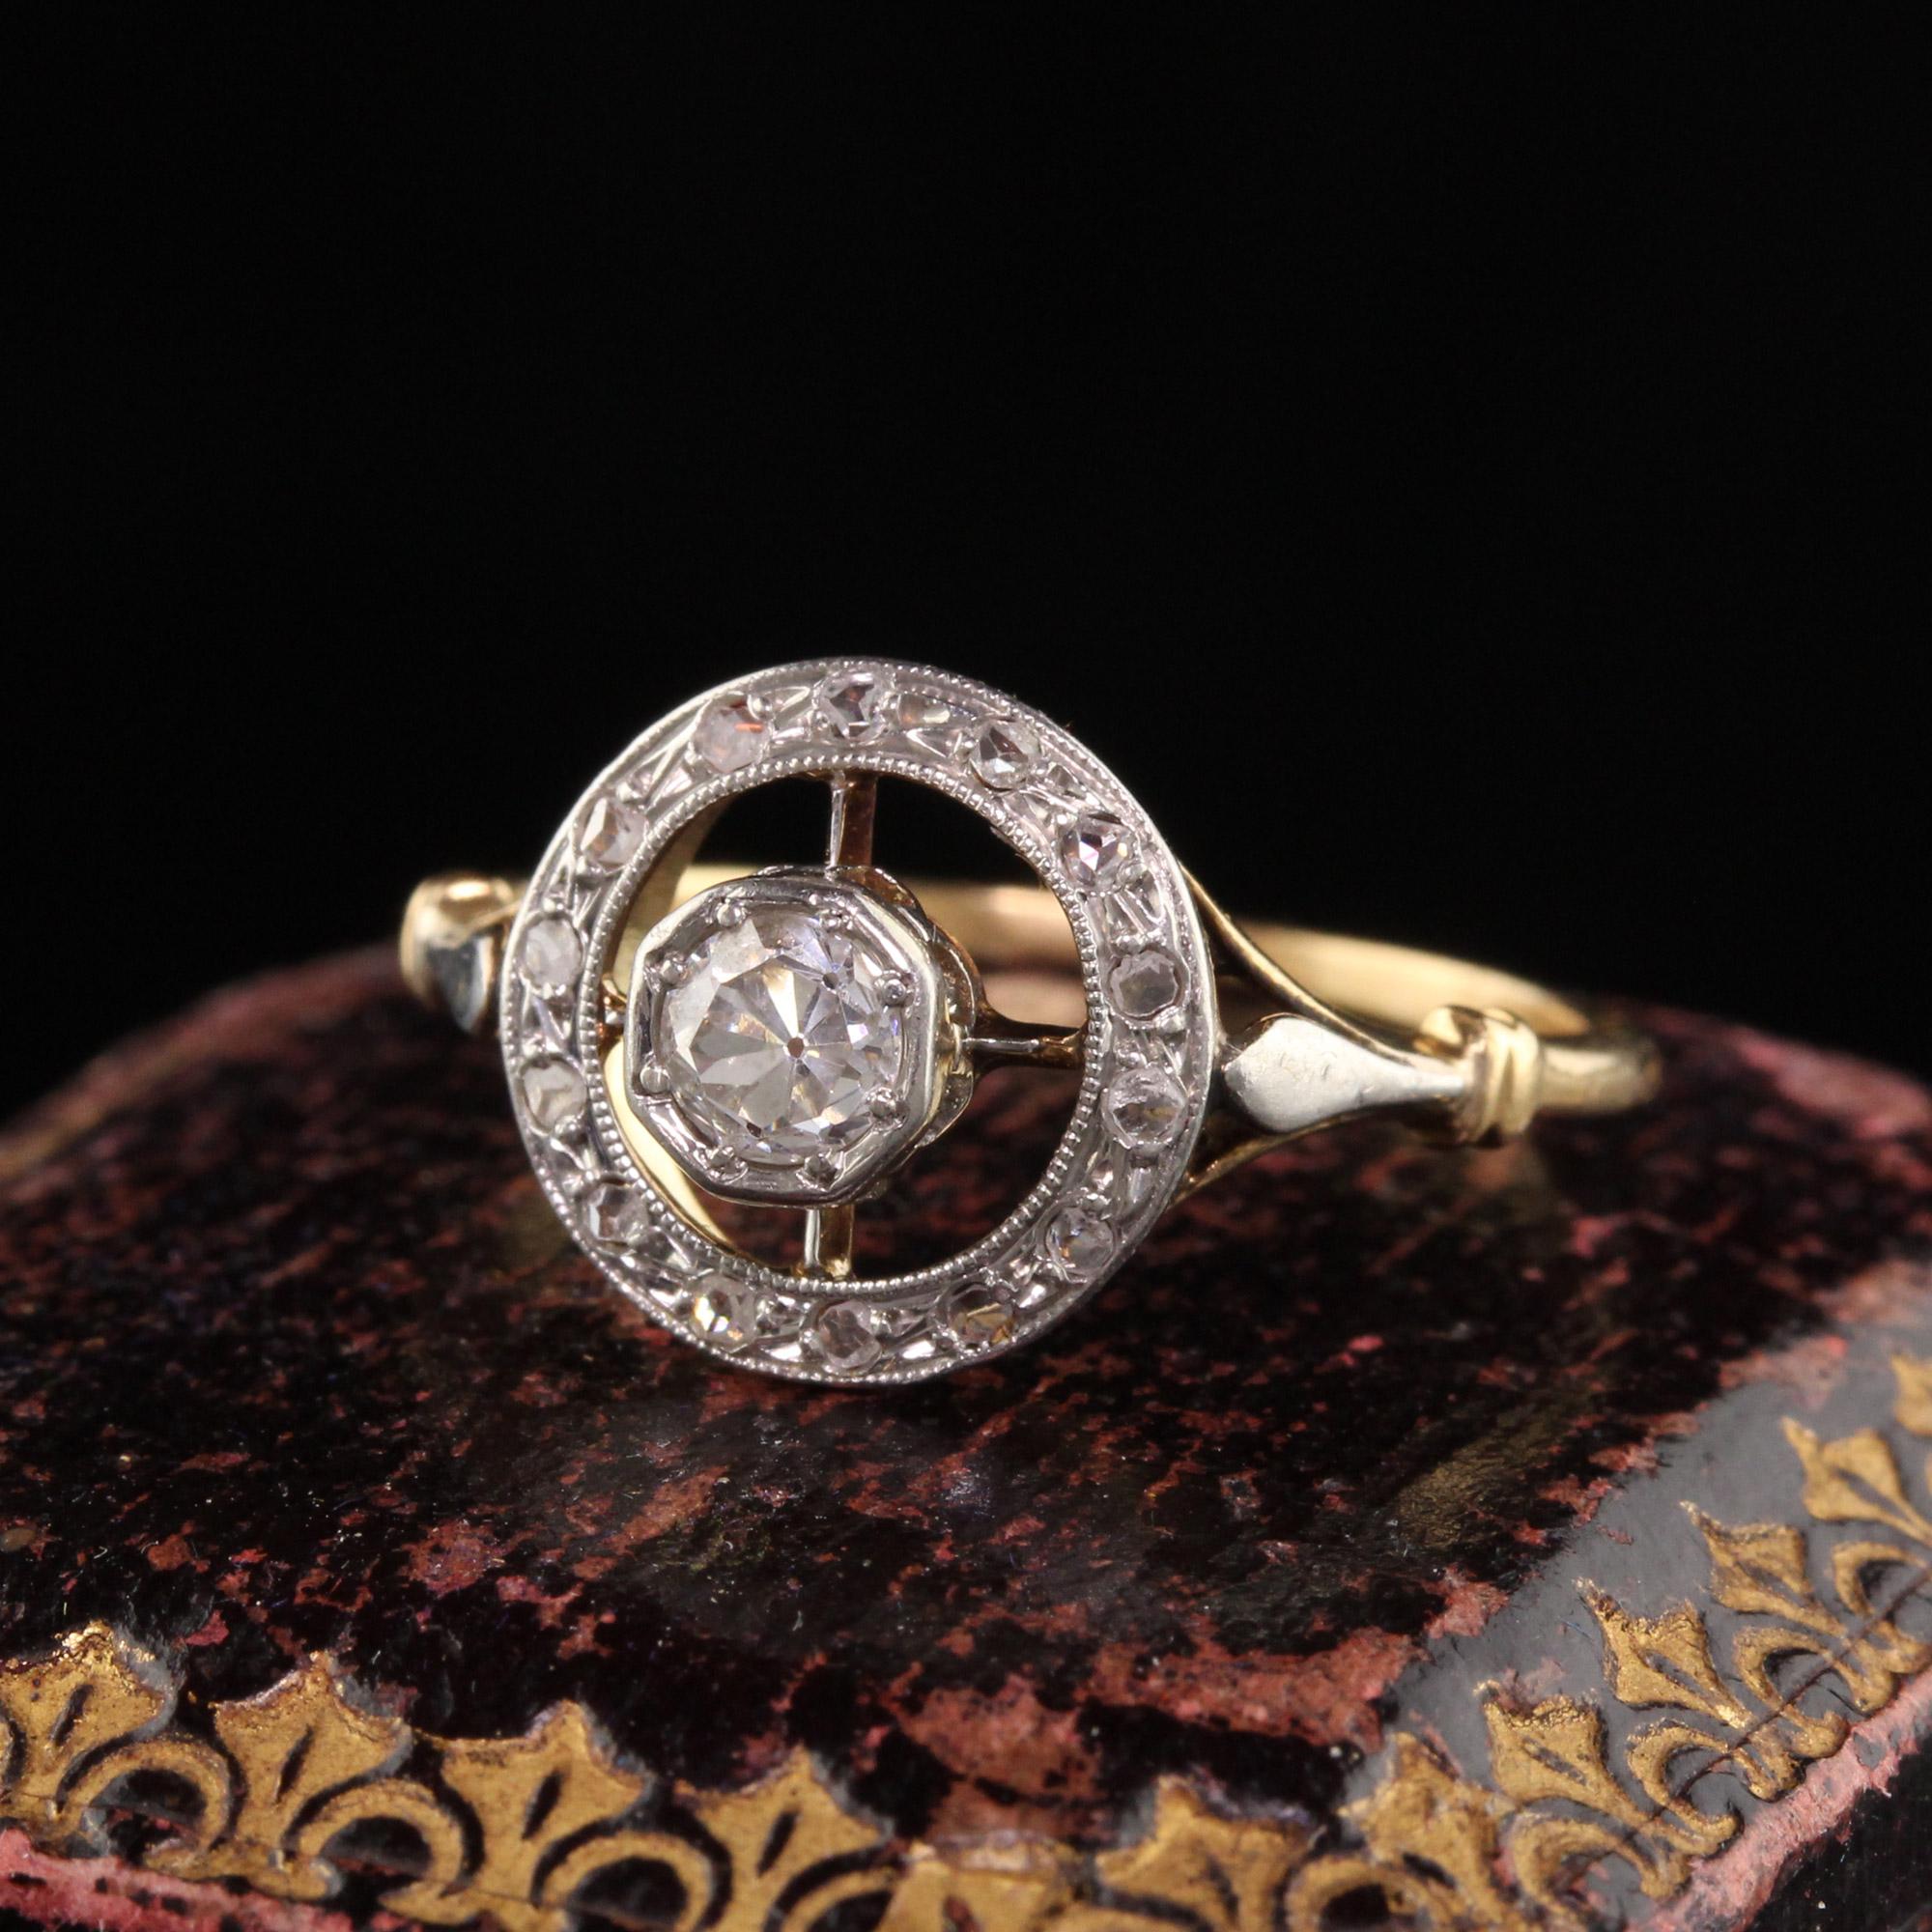 Beautiful Antique Victorian 18K Yellow Gold Old Mine Cut Diamond Engagement Target Ring. This beautiful Victorian target ring has an old mine cut diamond in the center surrounded by rose cut diamonds. The ring is in great condition.

Item